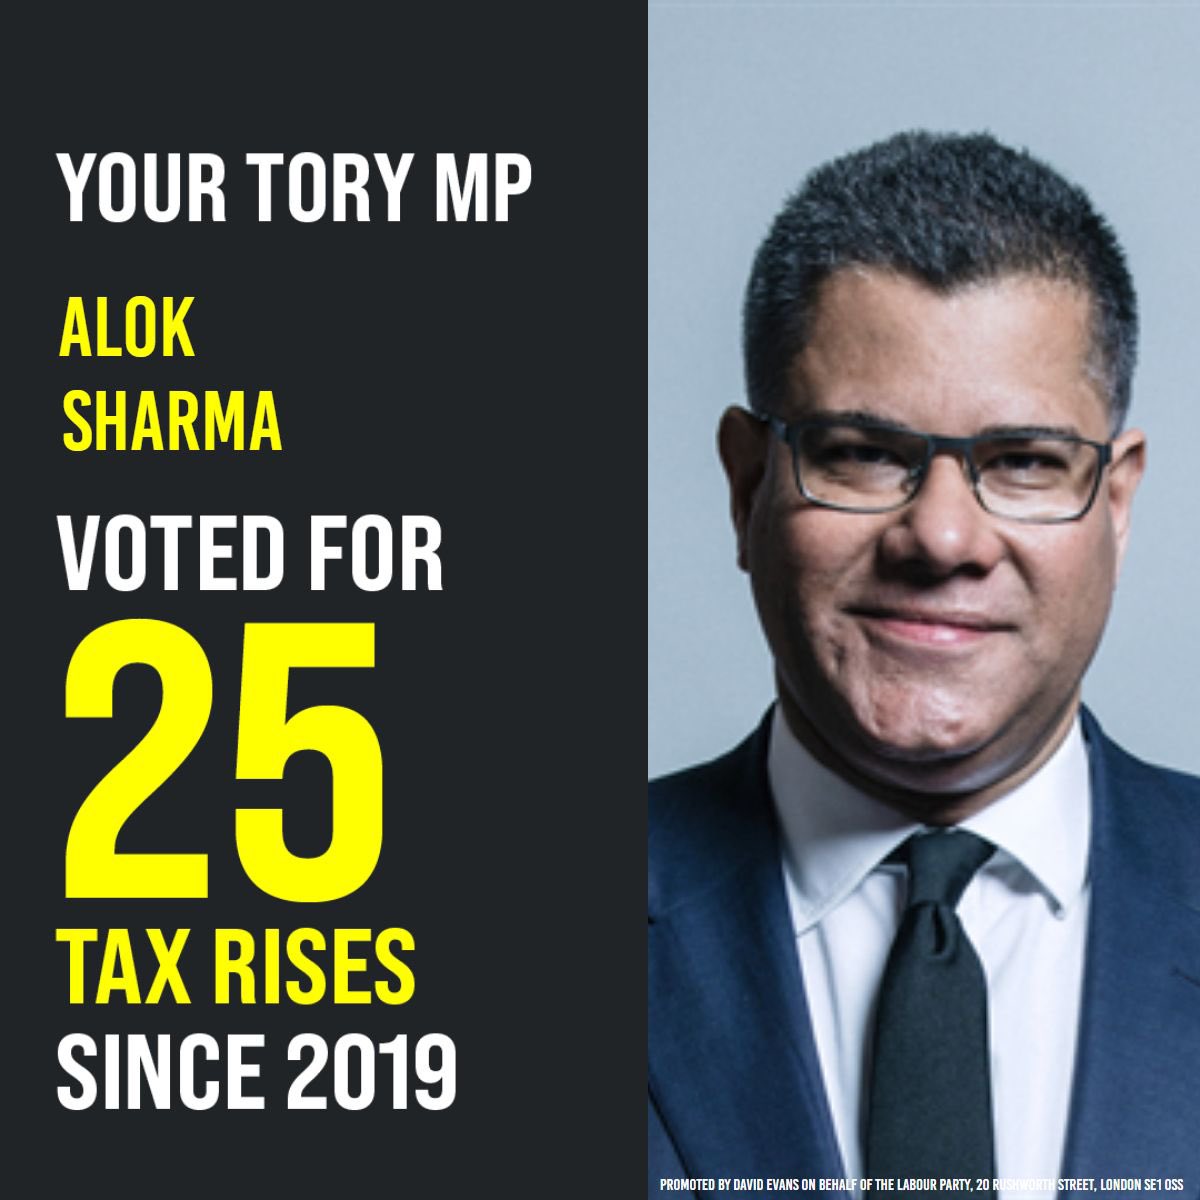 We’ve had 25 Tory tax rises. And yet public services are on their knees. Never have we paid so much and gotten so little in return. So where has most of the money gone? On paying interest on the national debt (£112bn this year alone!) Debt due to 13 years of Tory failure.